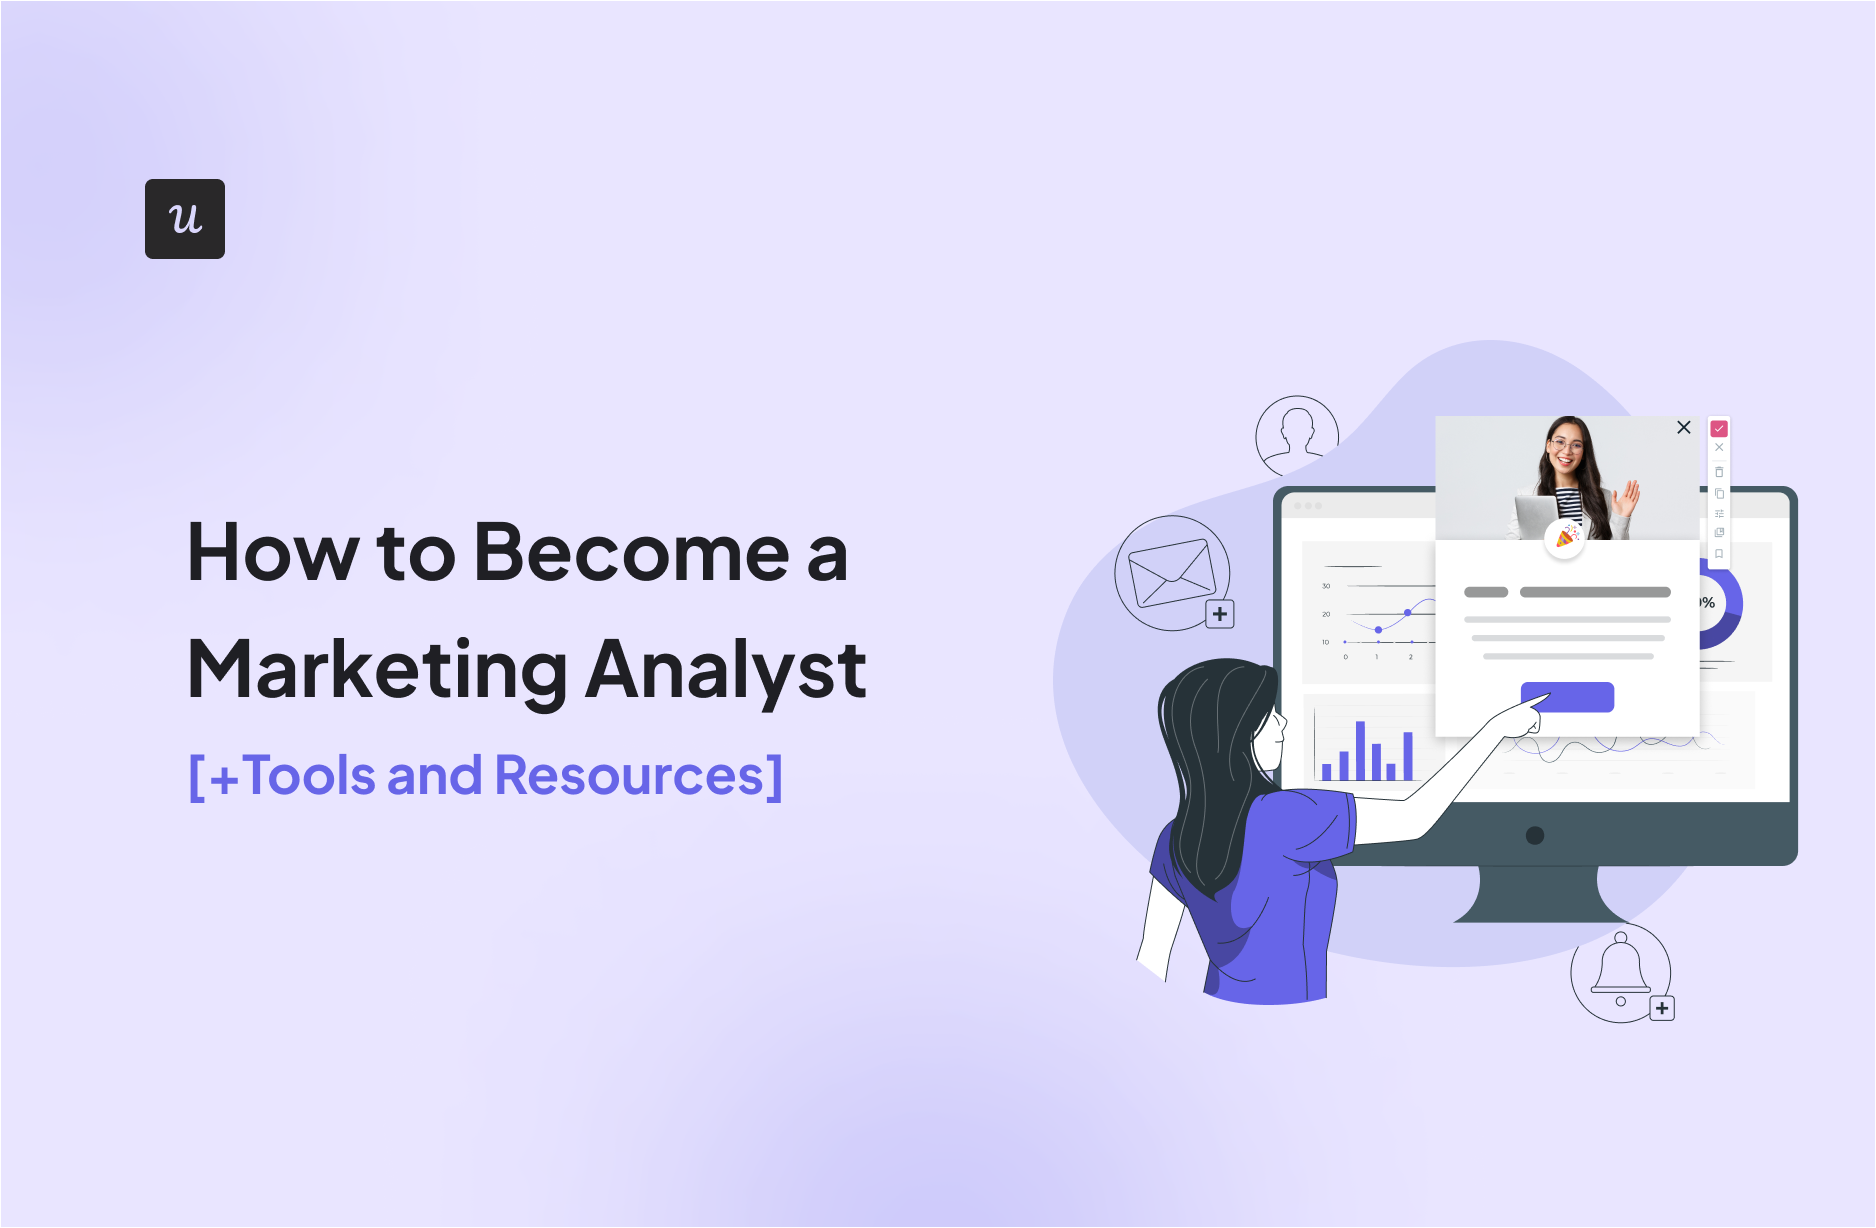 How to Become a Marketing Analyst [+Tools and Resources]